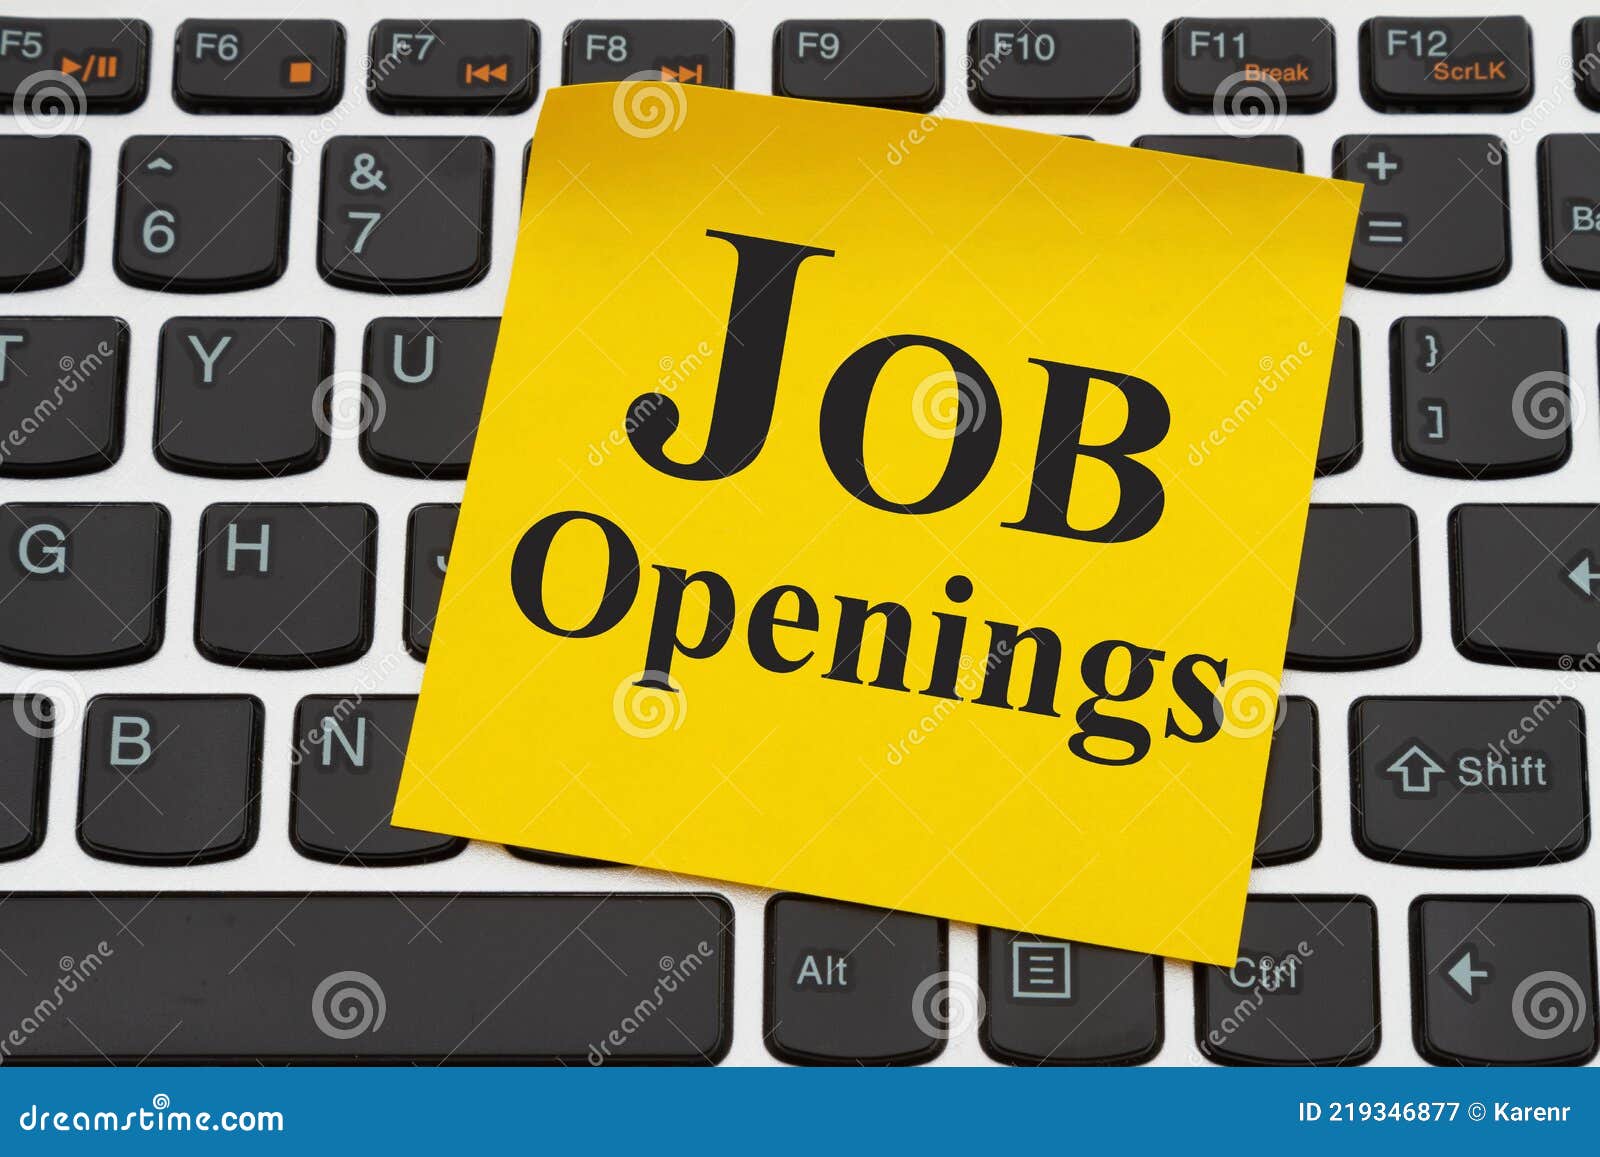 job openings message on yellow sticky note on a keyboard